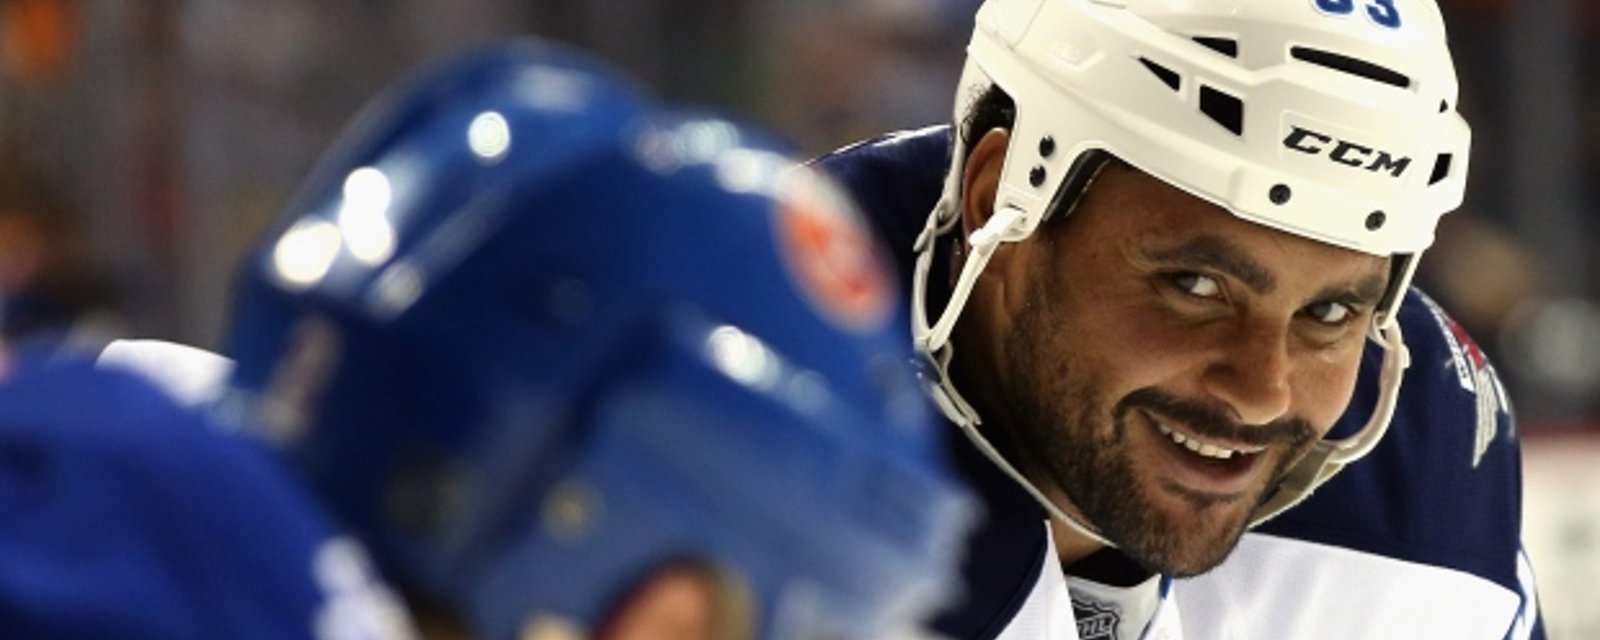 Breaking: Great news for Byfuglien at Jets' practice! 